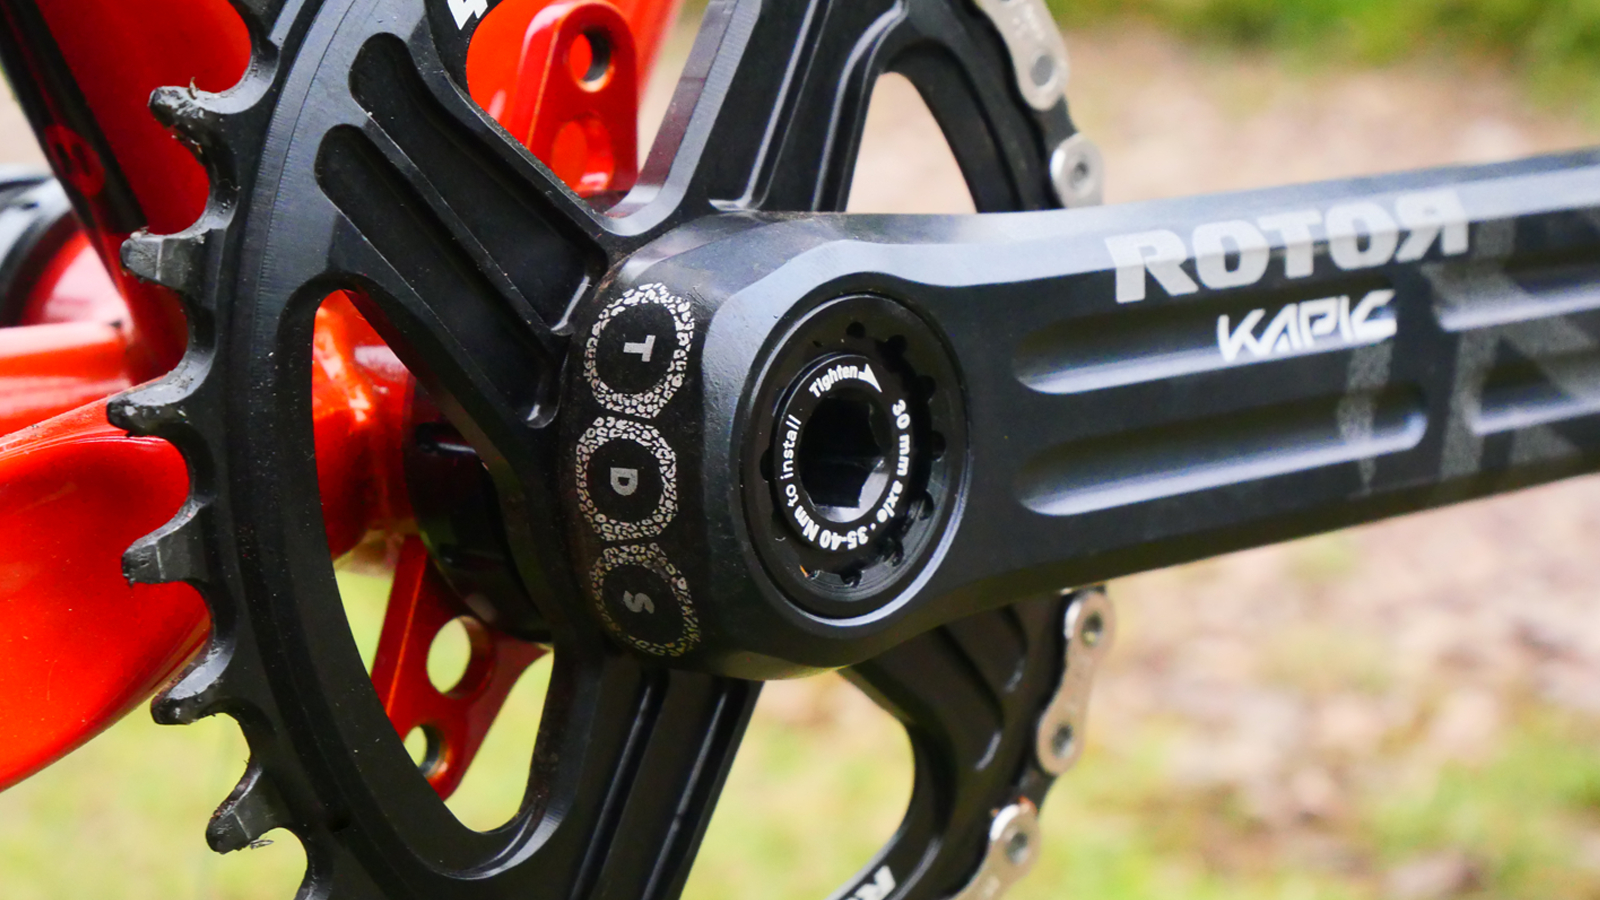 Rotor Kapic crankset uses Trinity Drilling System to internally hollow out the crank